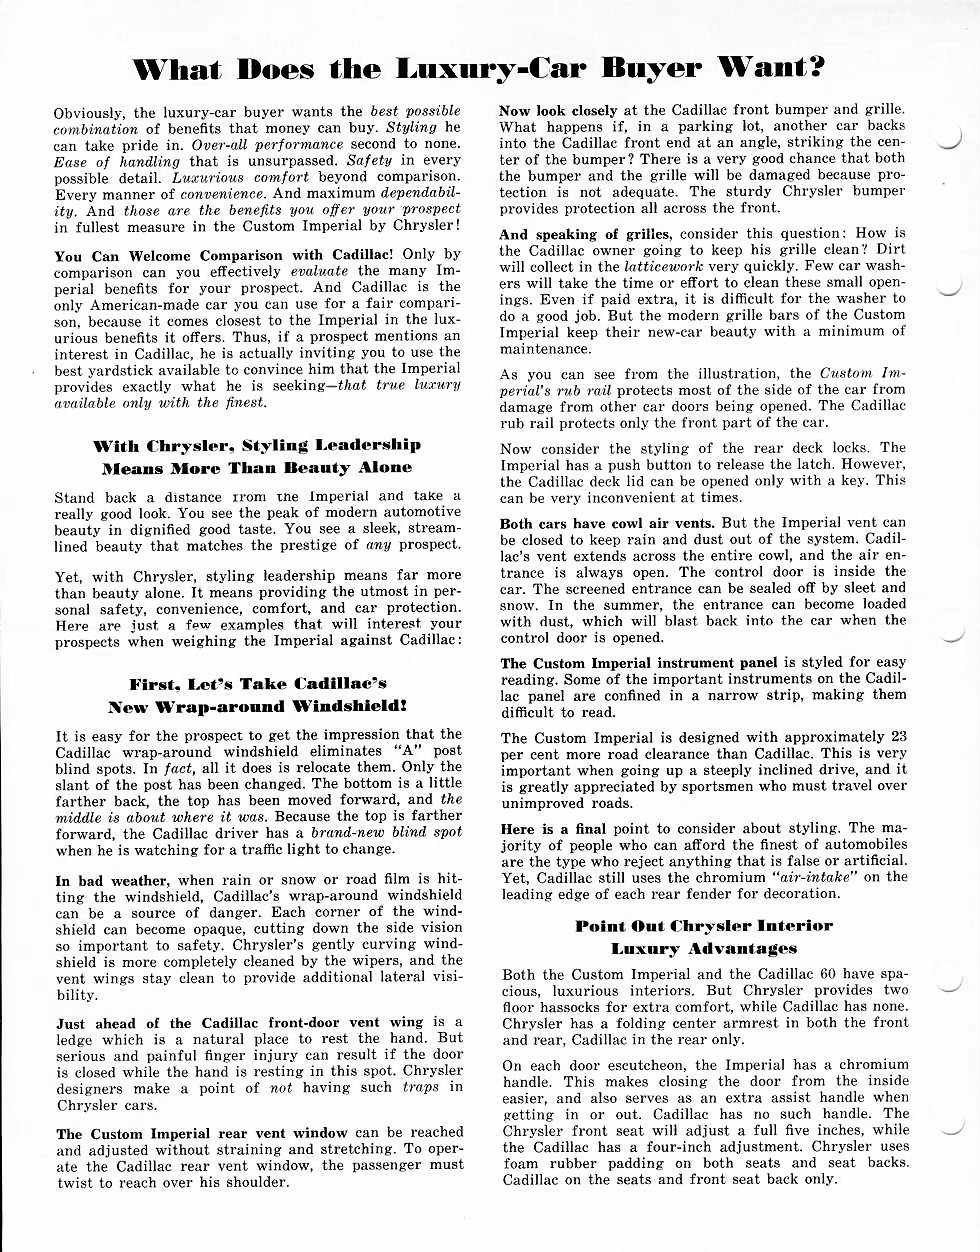 1954 Chrysler Imperial Comparison Page 3